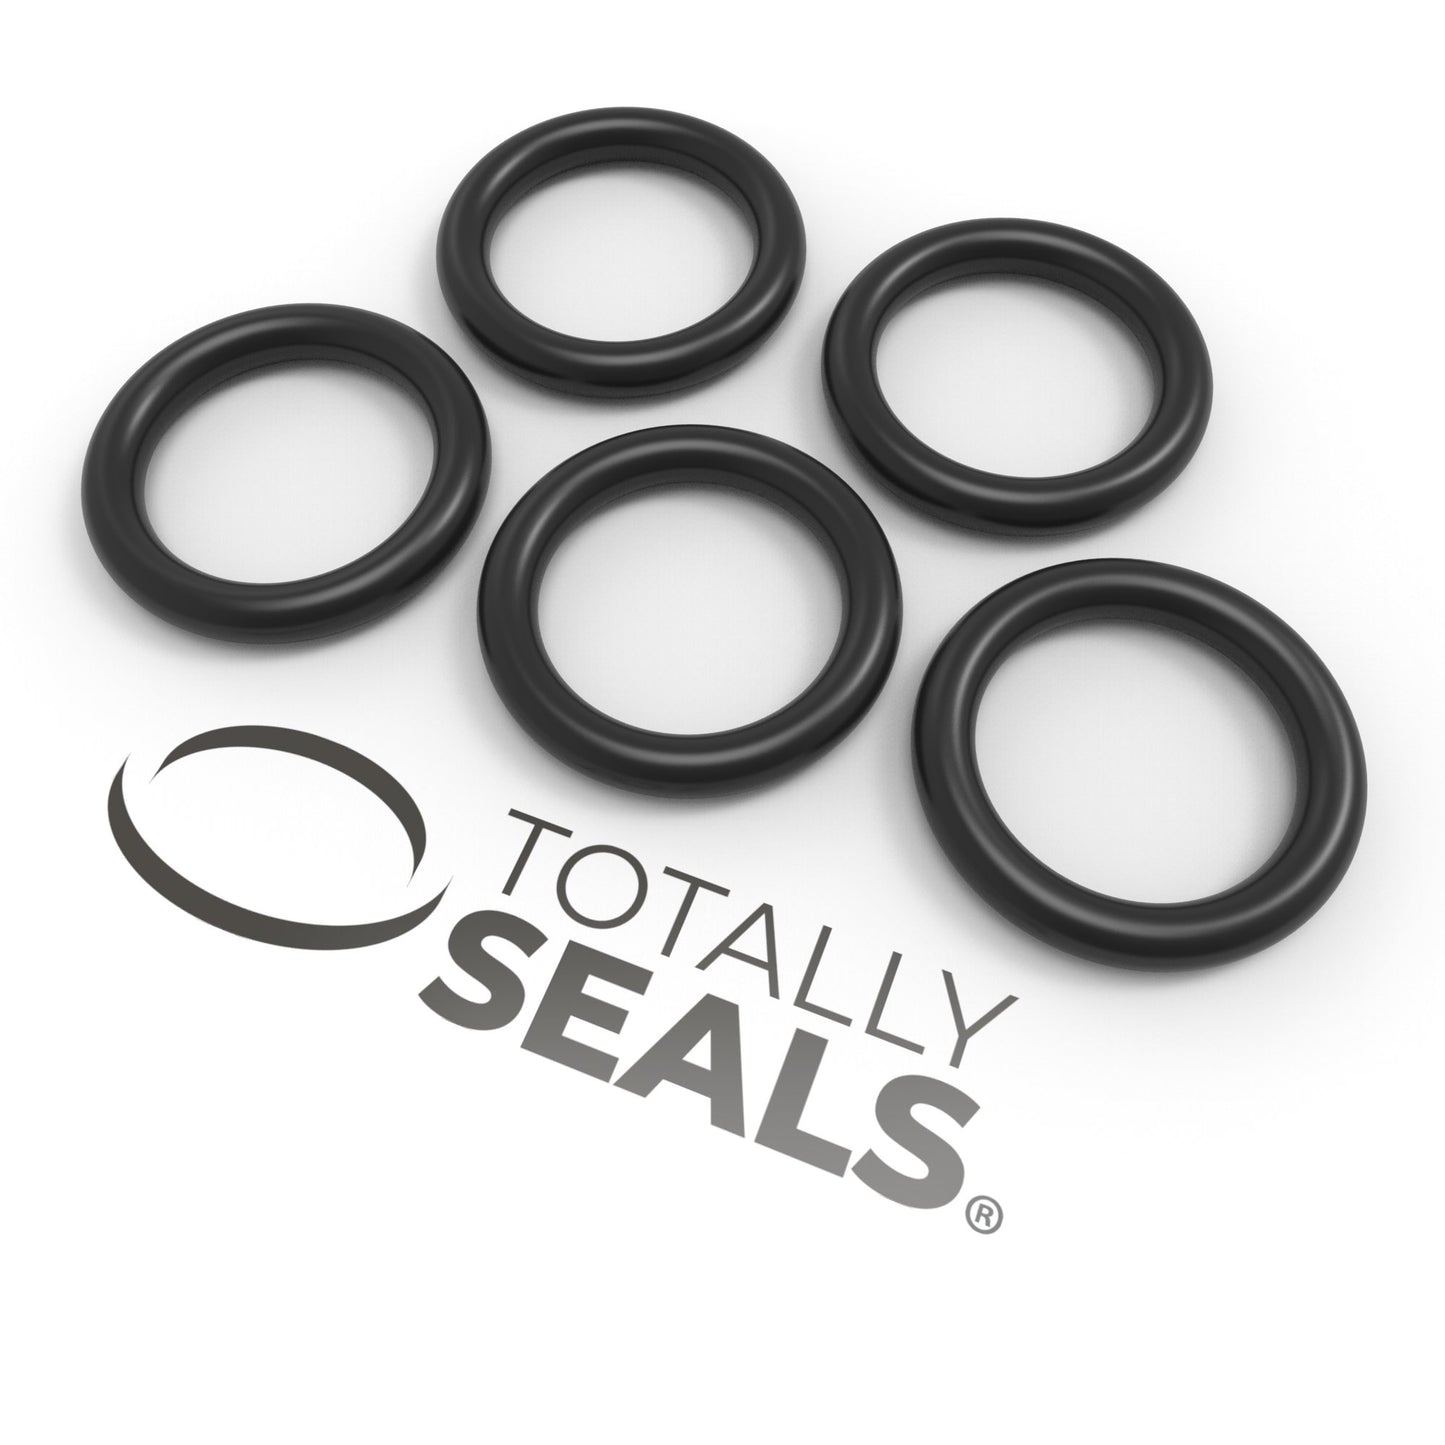 11/16" x 3/32" (BS115) Imperial Nitrile O-Rings - Totally Seals®